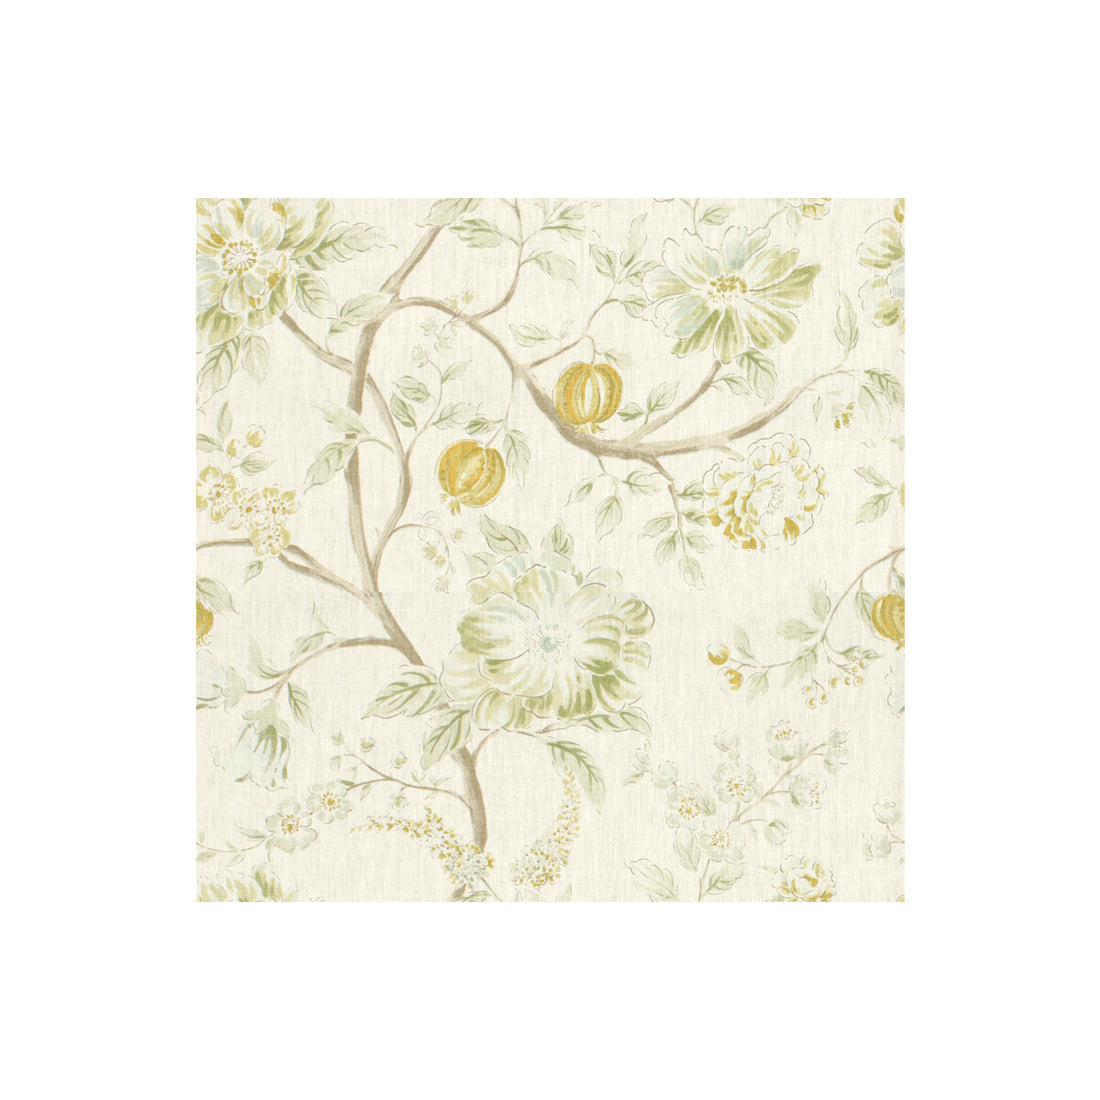 Errington fabric in meadow color - pattern ERRINGTON.315.0 - by Kravet Basics in the Sarah Richardson Affinity collection